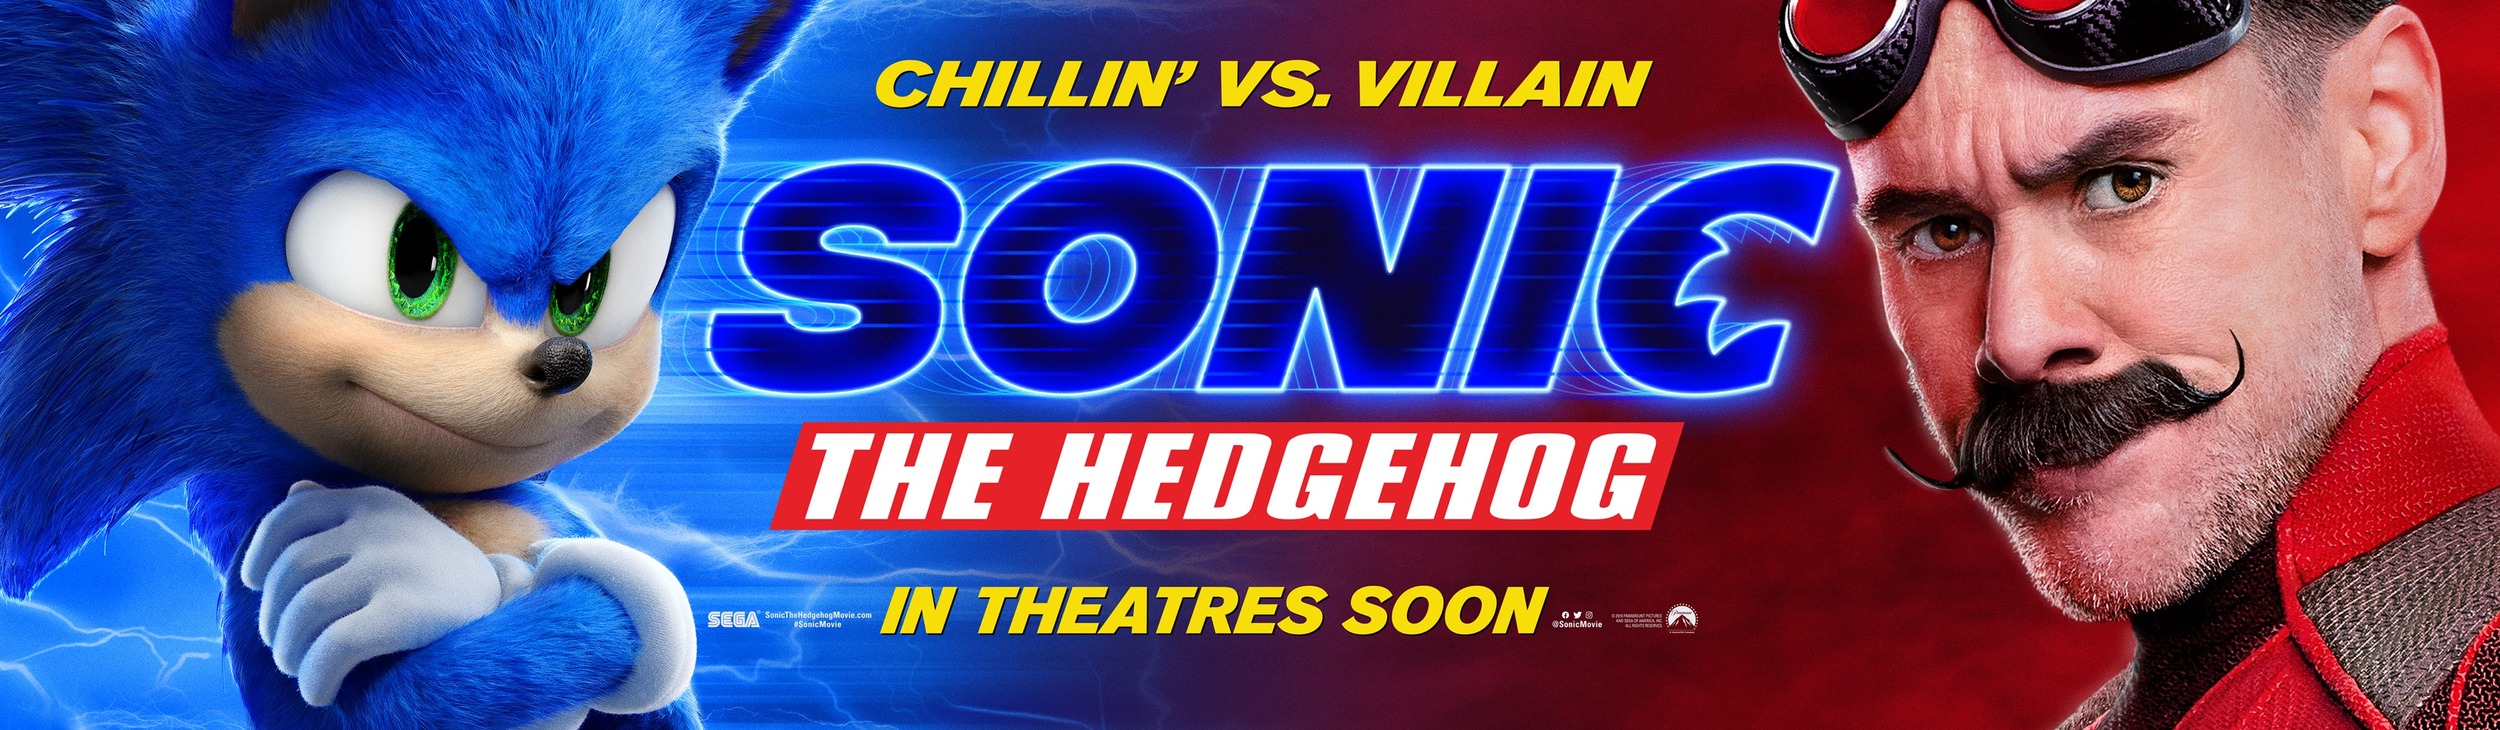 Mega Sized Movie Poster Image for Sonic the Hedgehog (#21 of 28)